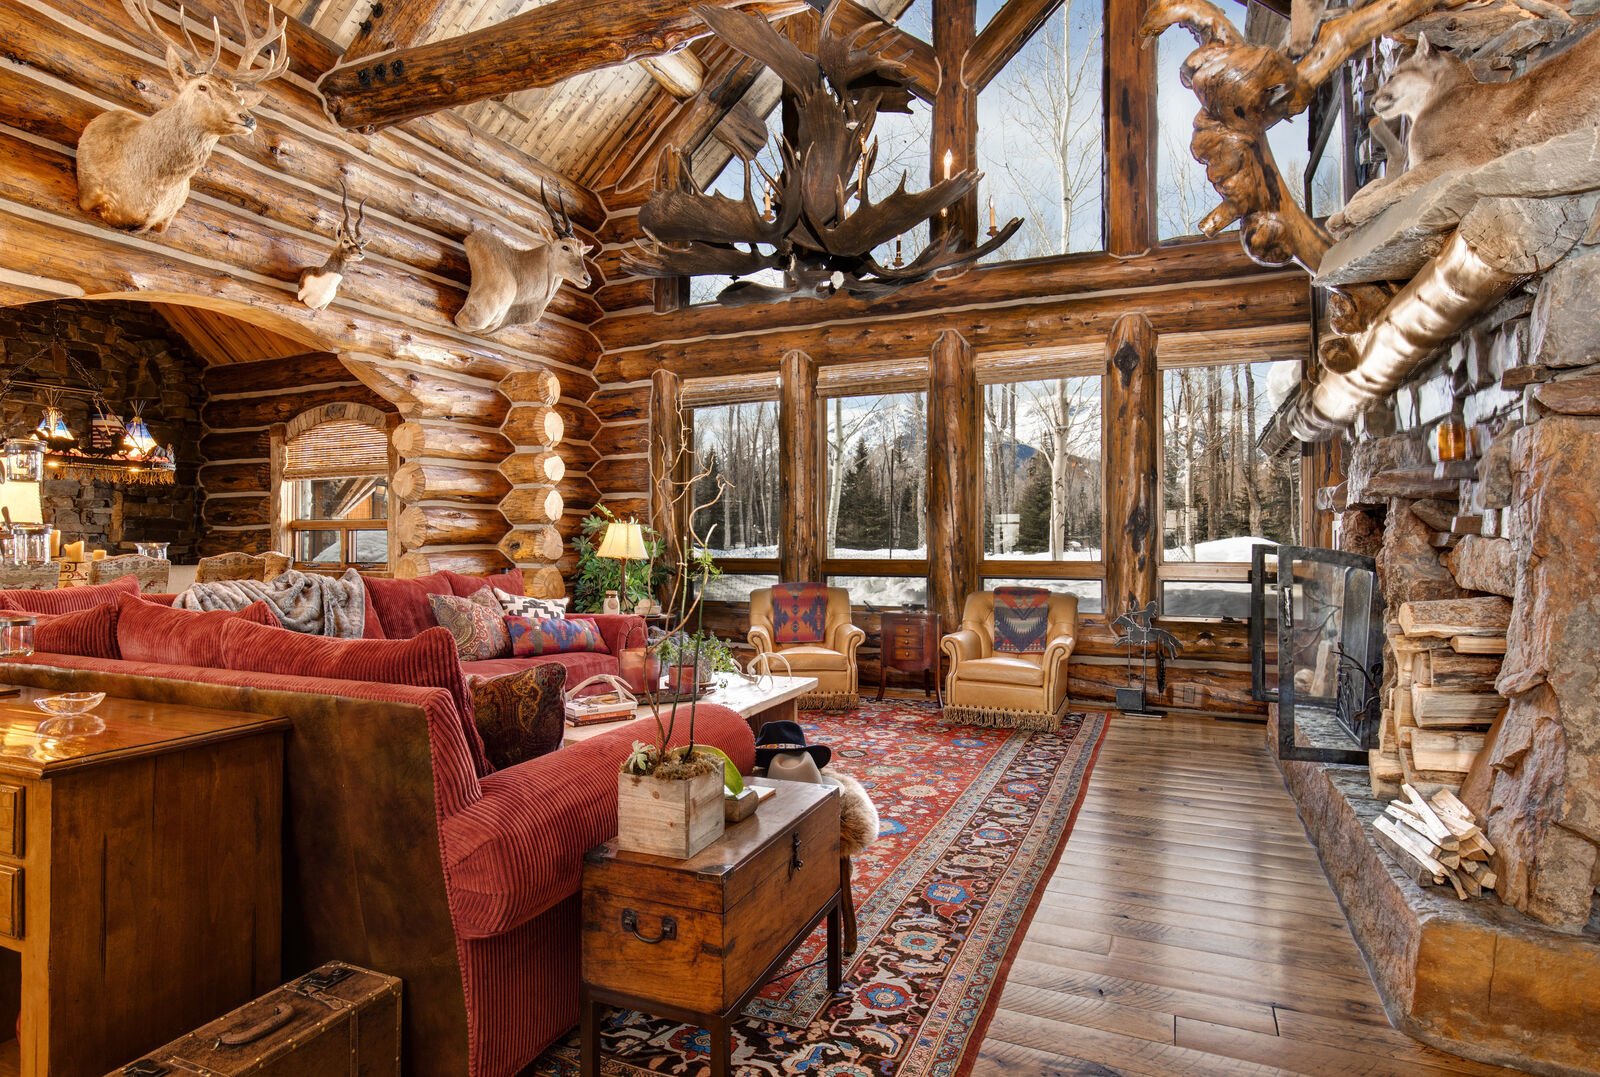 Our vacation rentals in Jackson Hole, WY